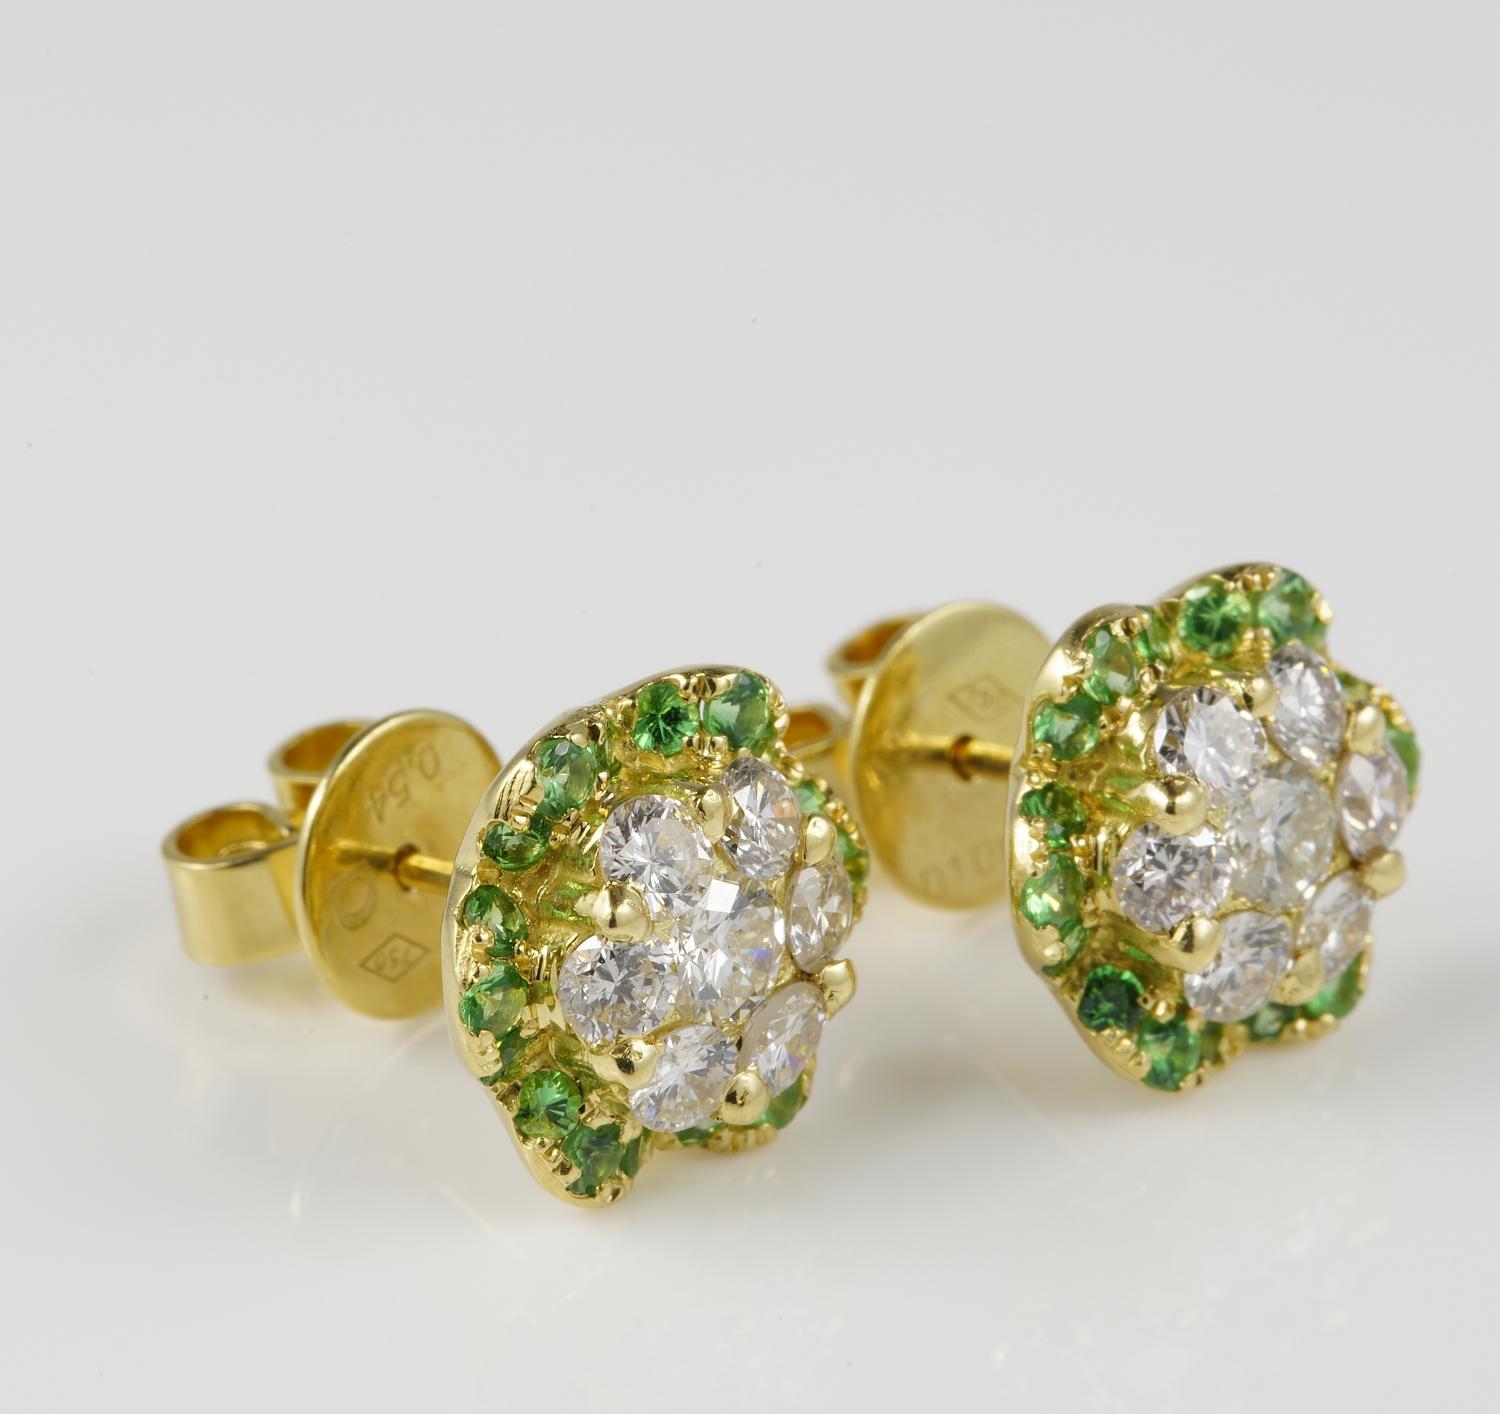 Precious for all day long

Exceptional quality, stunning design for this pair of Vintage stud earrings

A perfect pair to have always on, good size full of sparkle and so distinctive in their lovely setting being each individual Diamond set so close